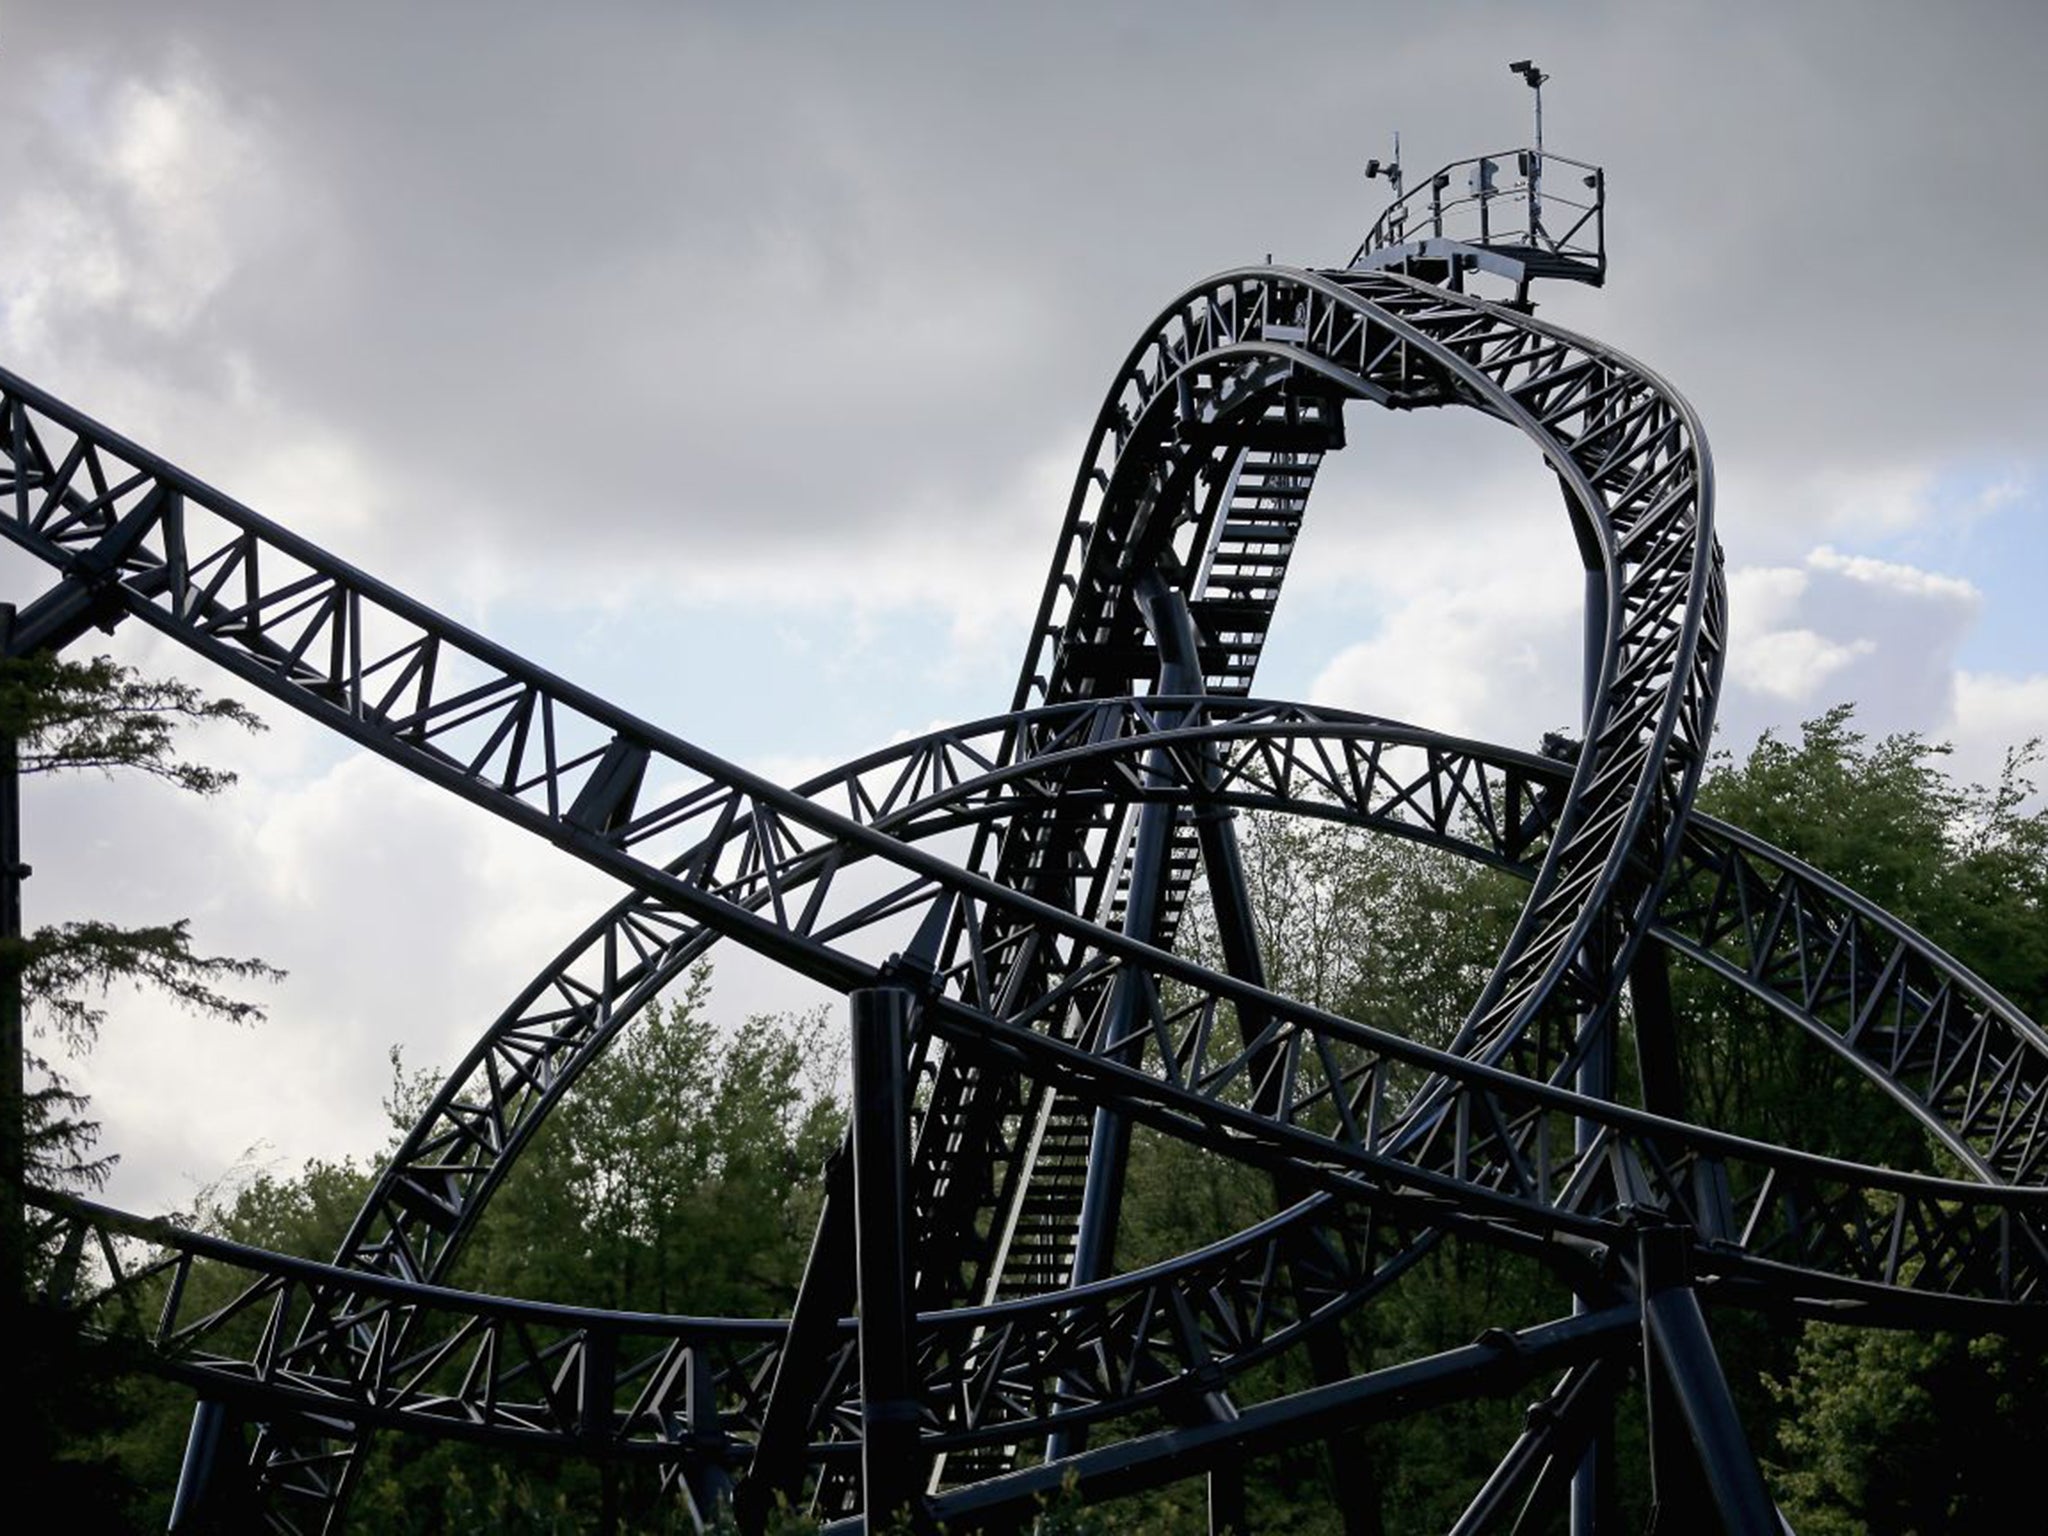 The Smiler ride at Alton Towers will remain shut until the Health and Safety Executive lifts its prohibition notice